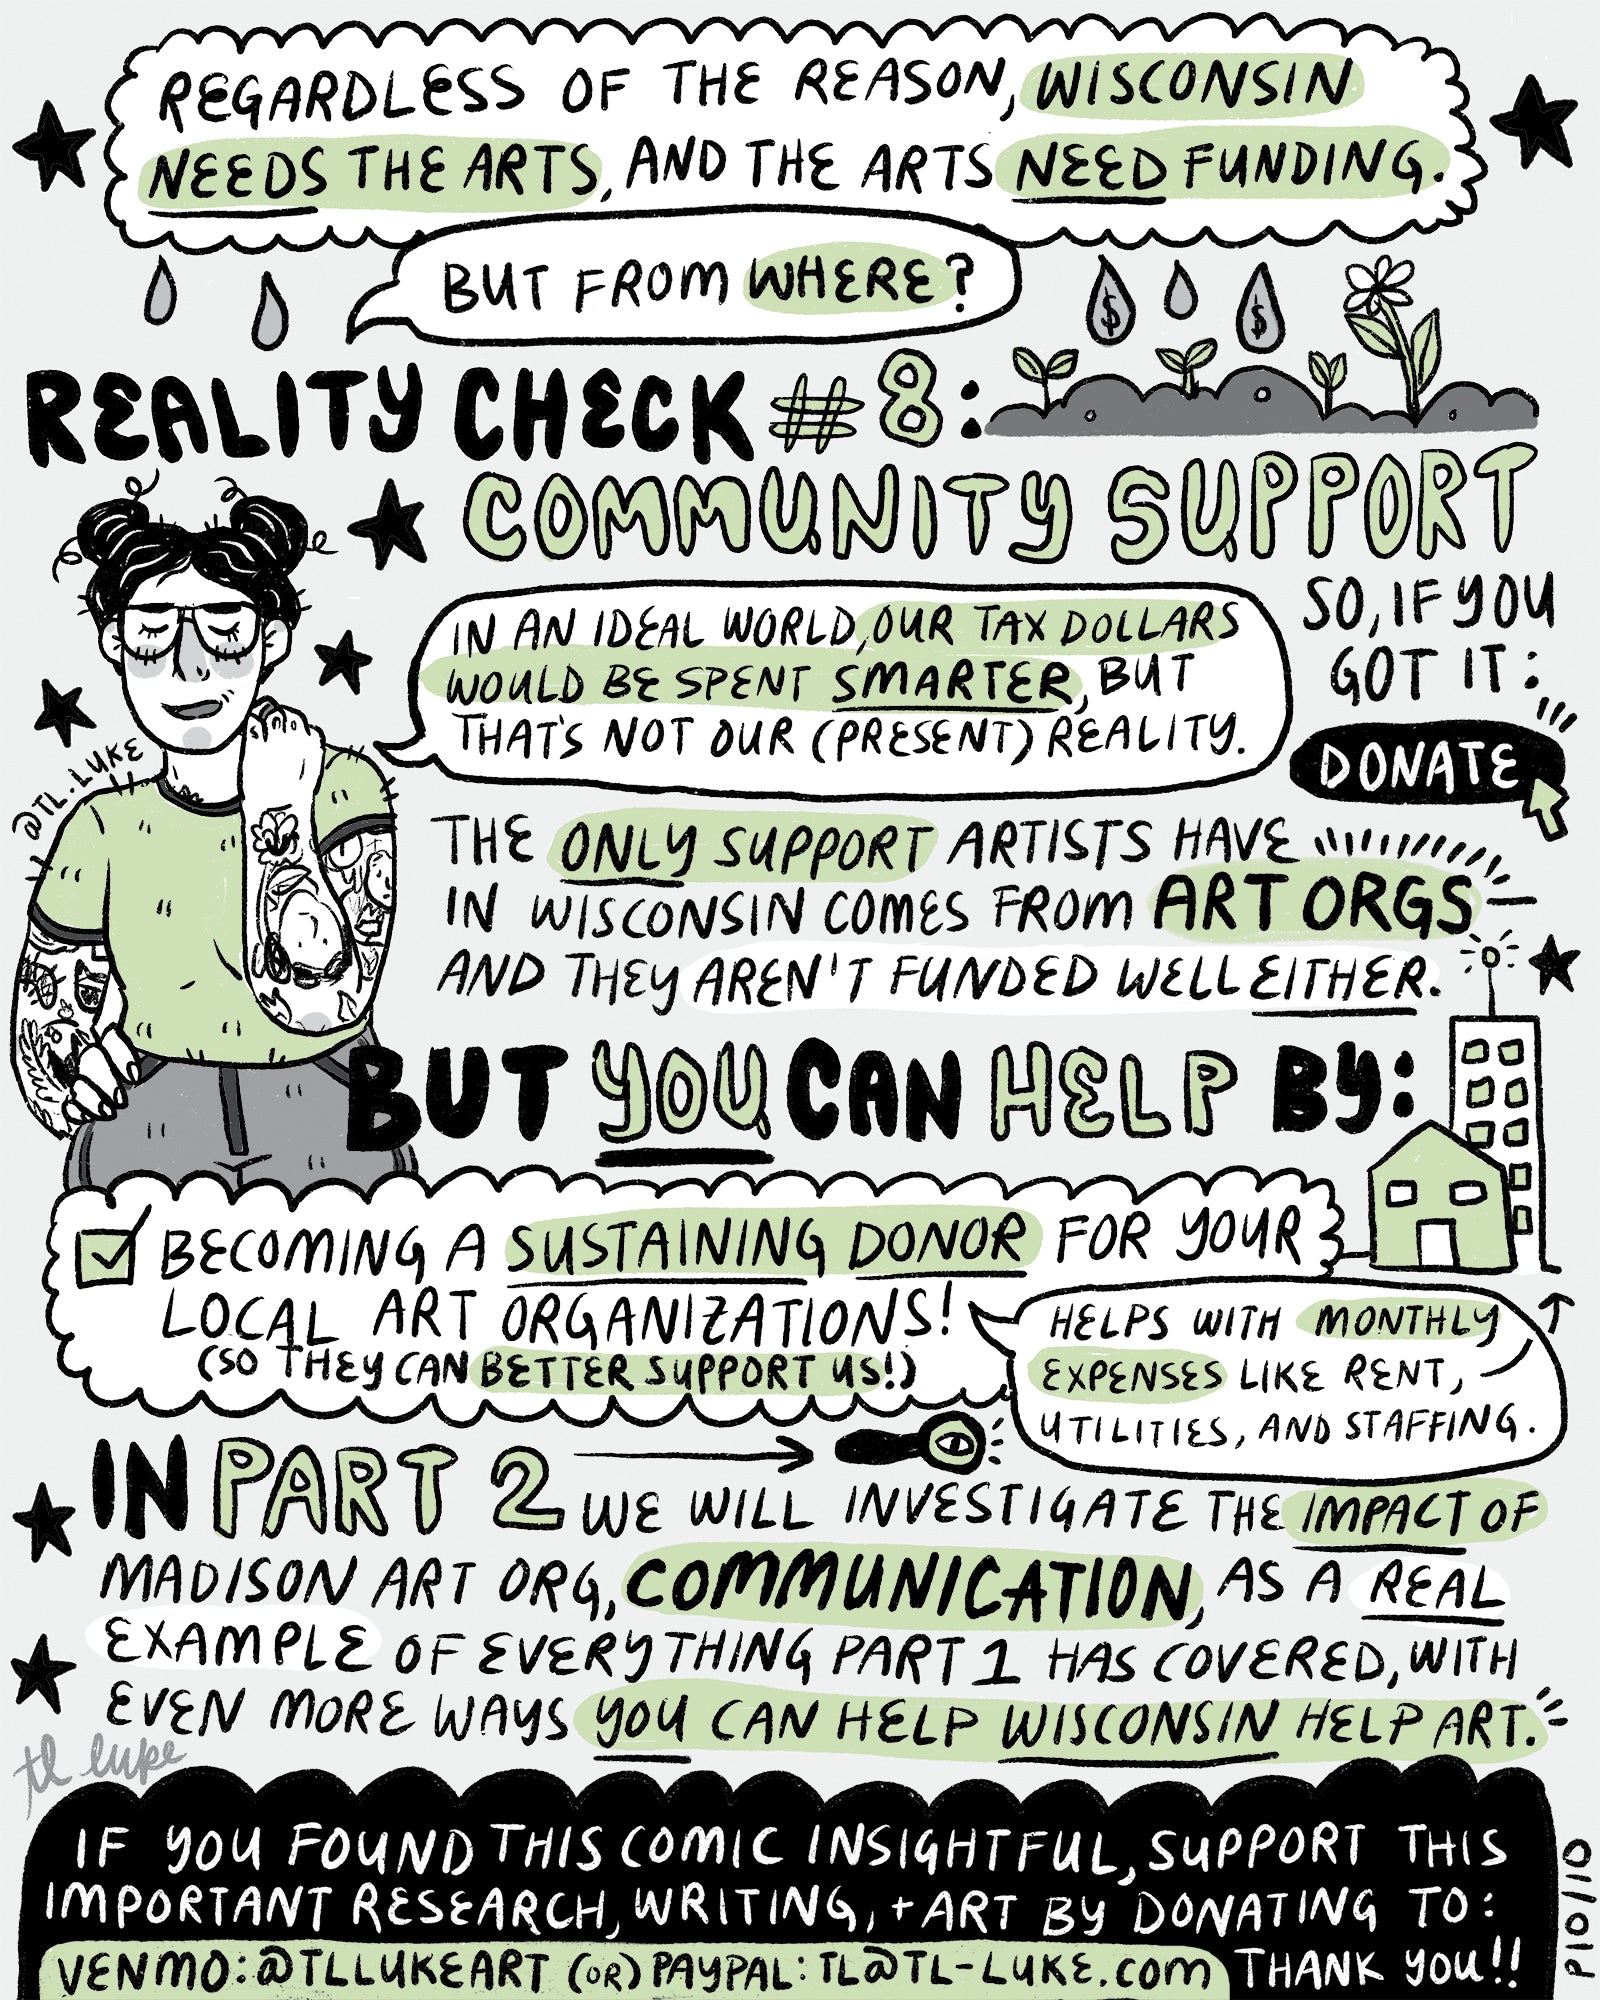 Page 10 of Auntie Luke's Art Economy Guide, last page of comic, explains why community support is necessary to help the arts.